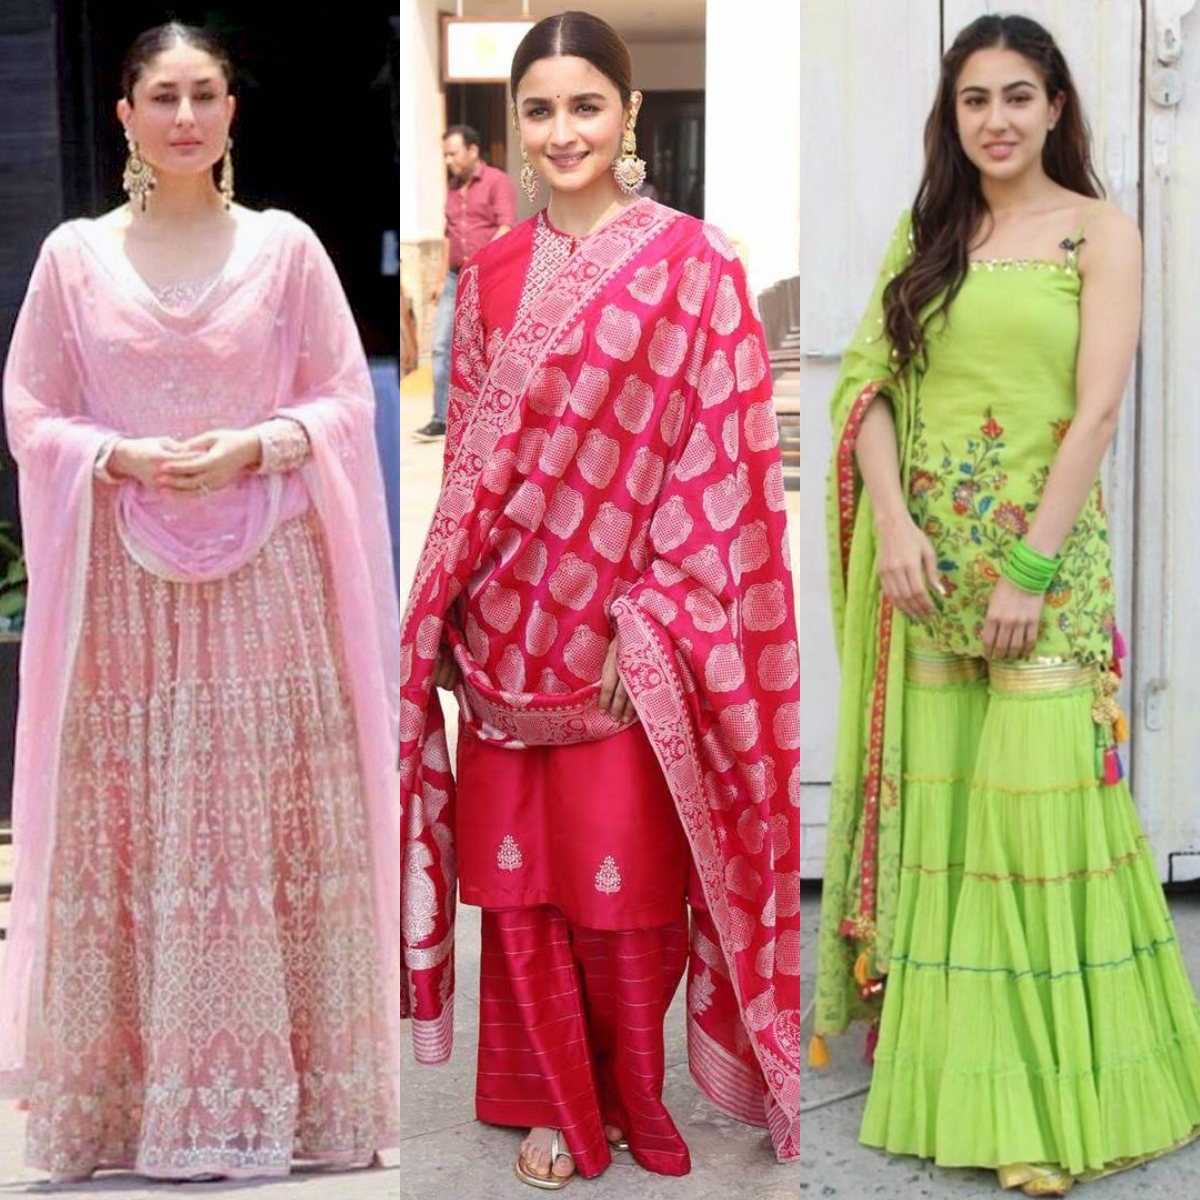 Diwali 2020: Bollywood approved simple yet elegant outfit inspiration for at home celebrations this year 